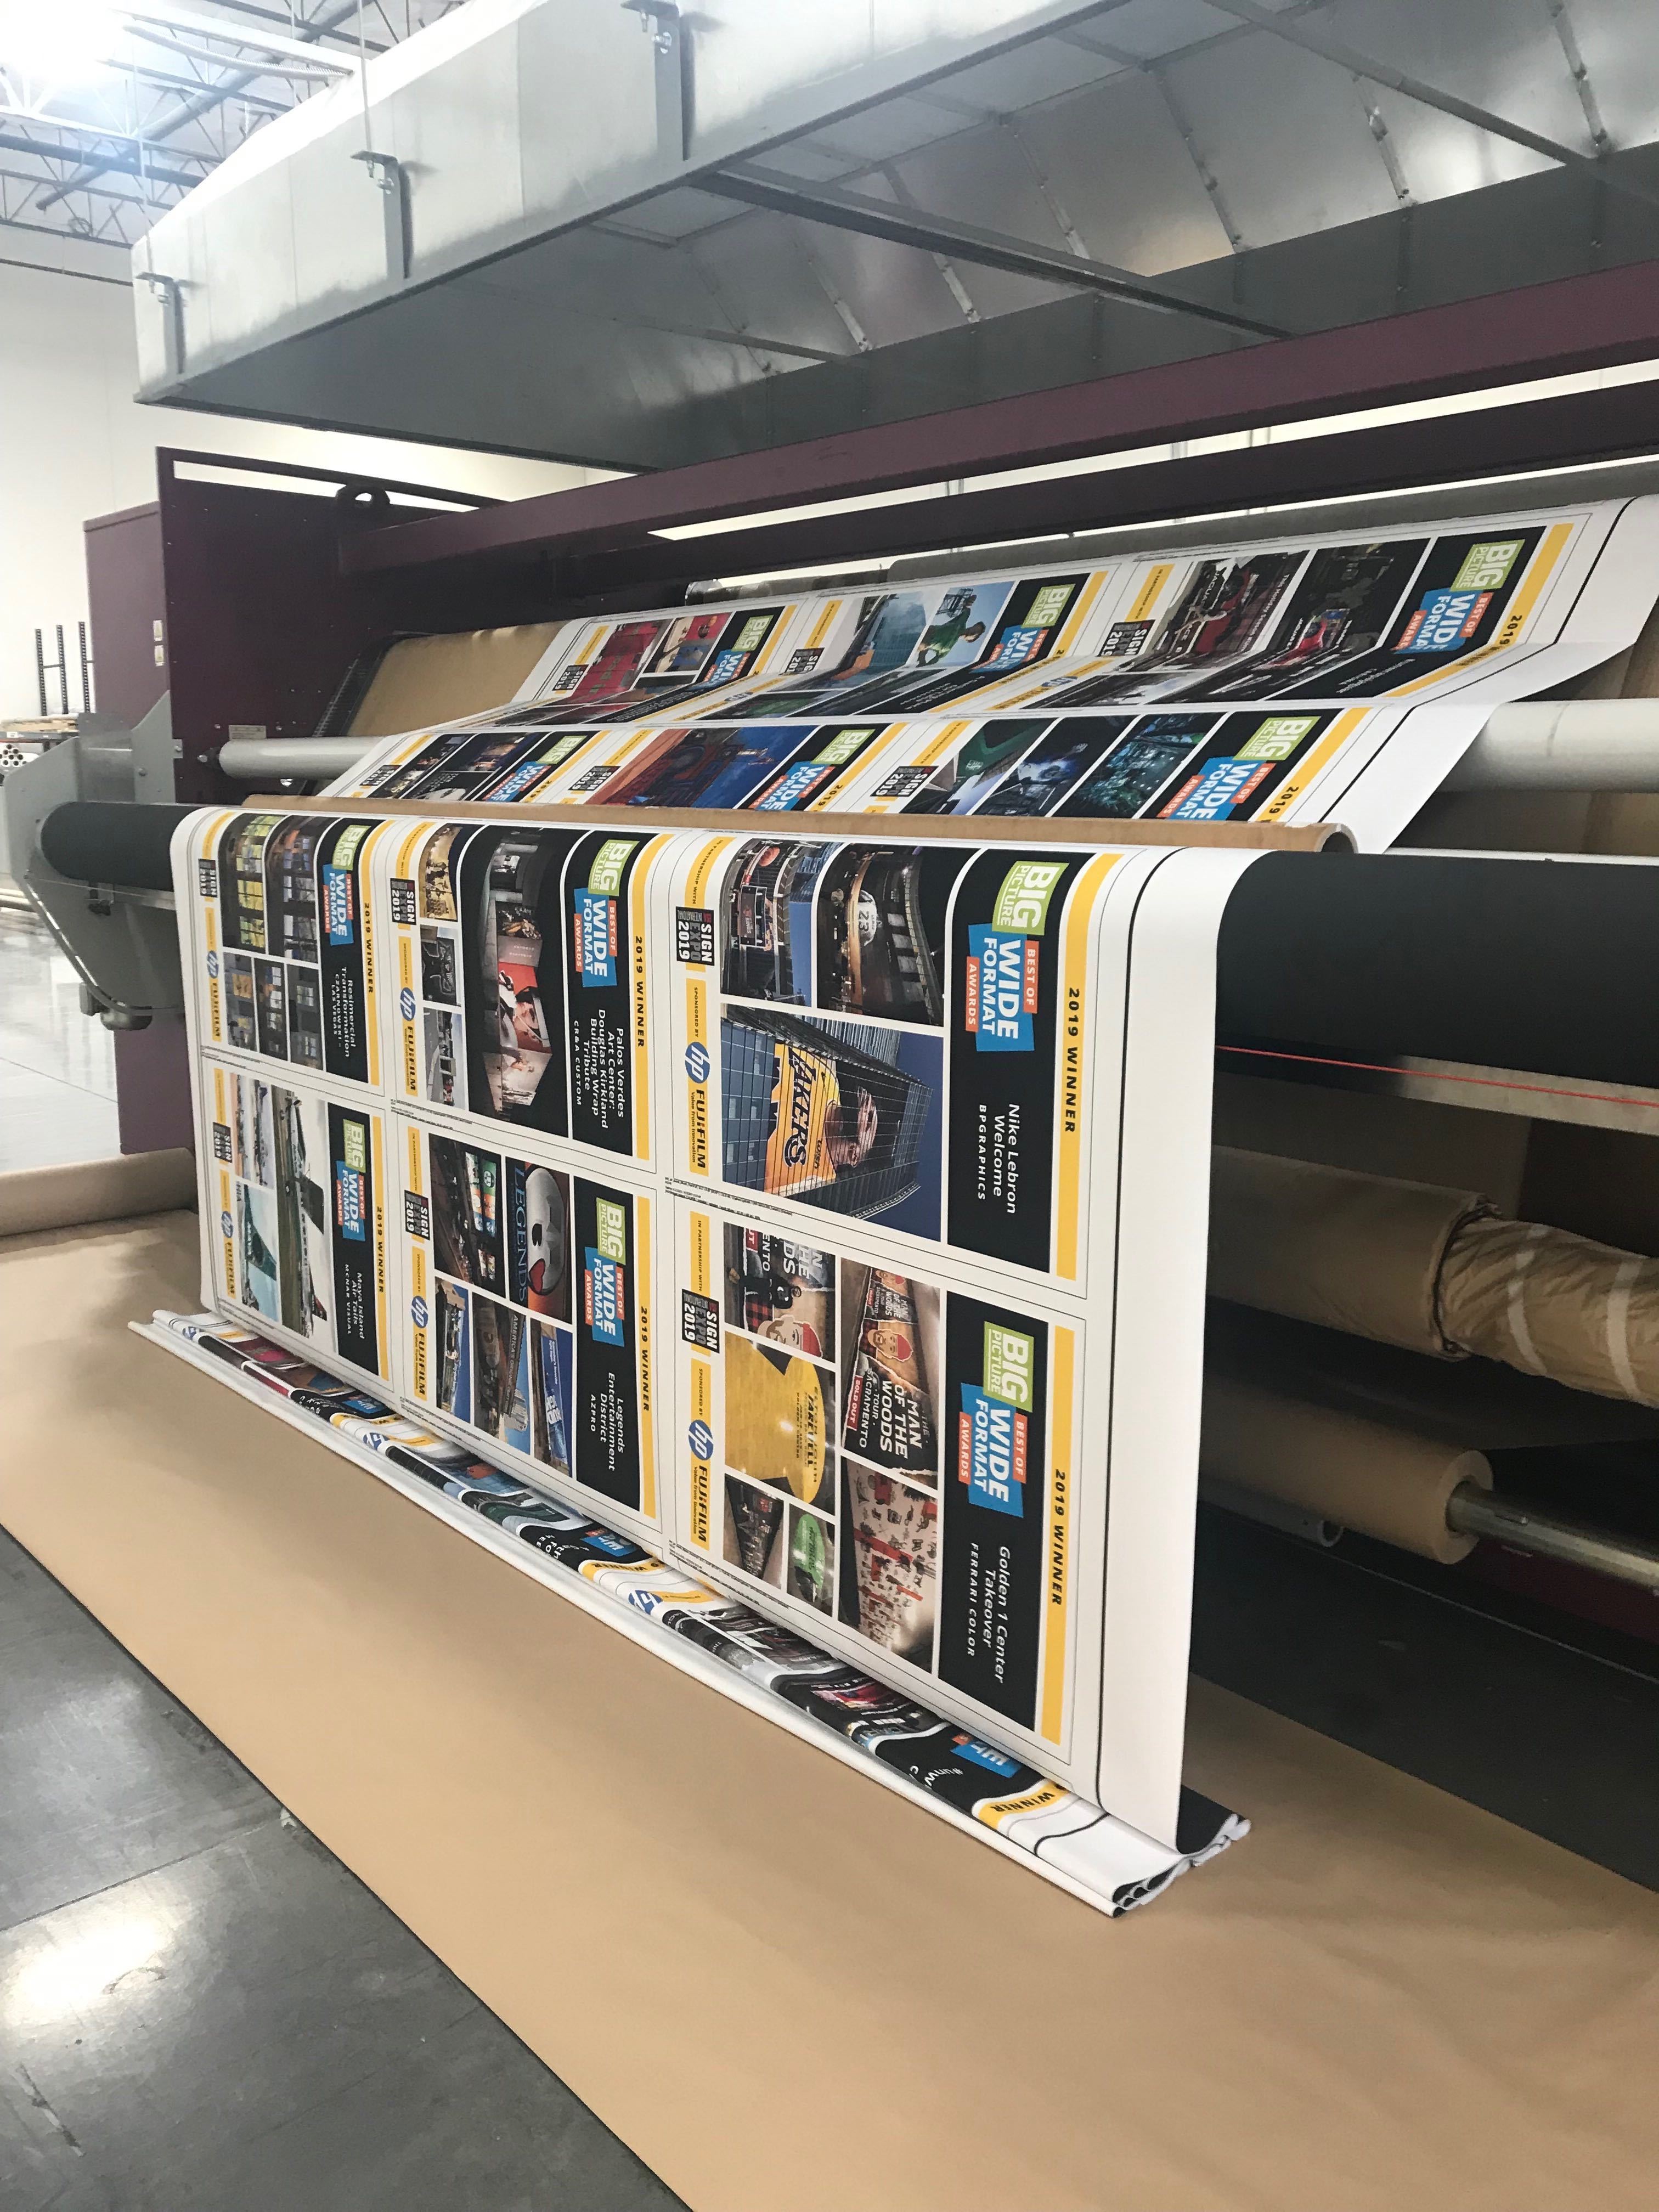 Pam Richards, a Big Picture Women in Print Award recipient, and her team at Color Gamut Digital Imaging (cgdi.co) in Las Vegas printed the custom 2019 awards highlighting each project. 